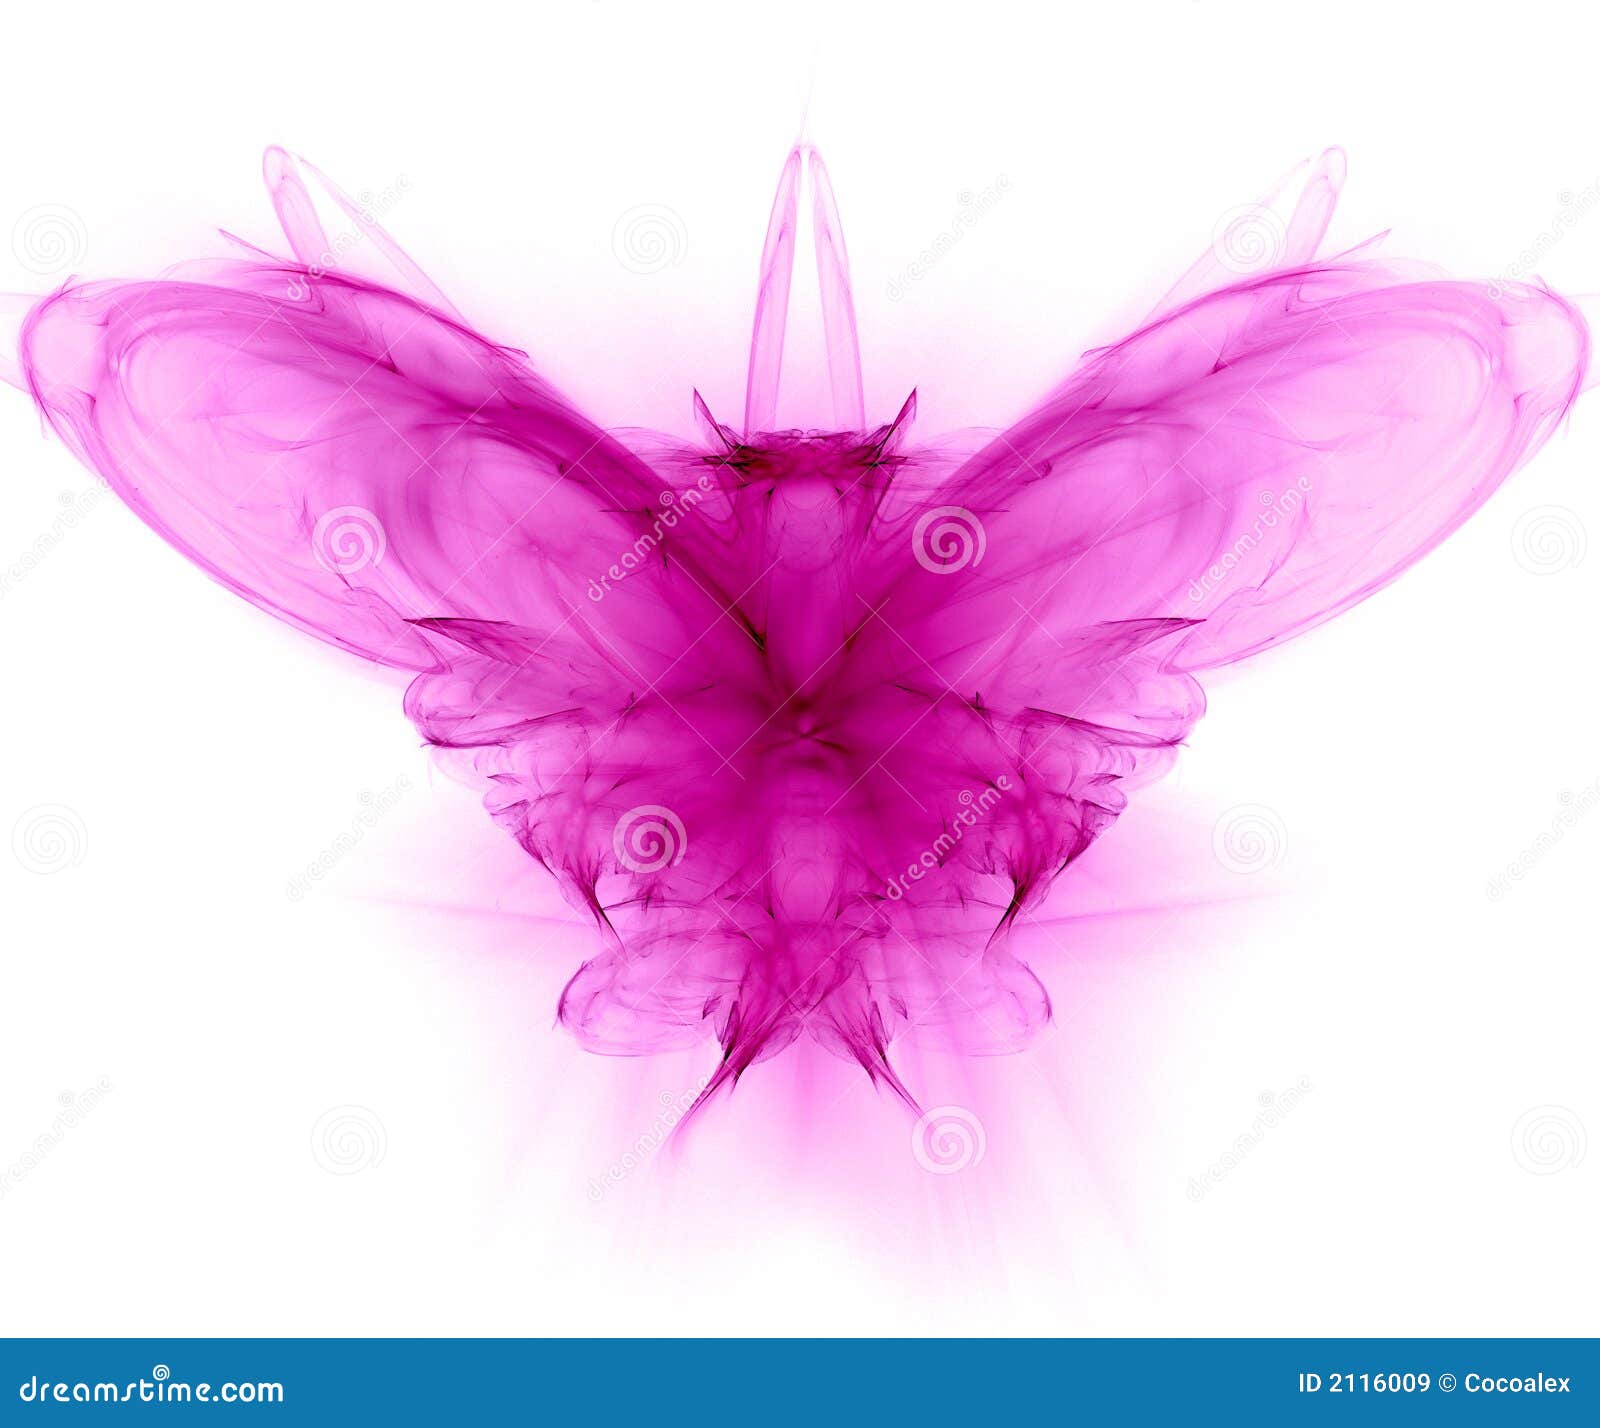 butterfly - fractal generated